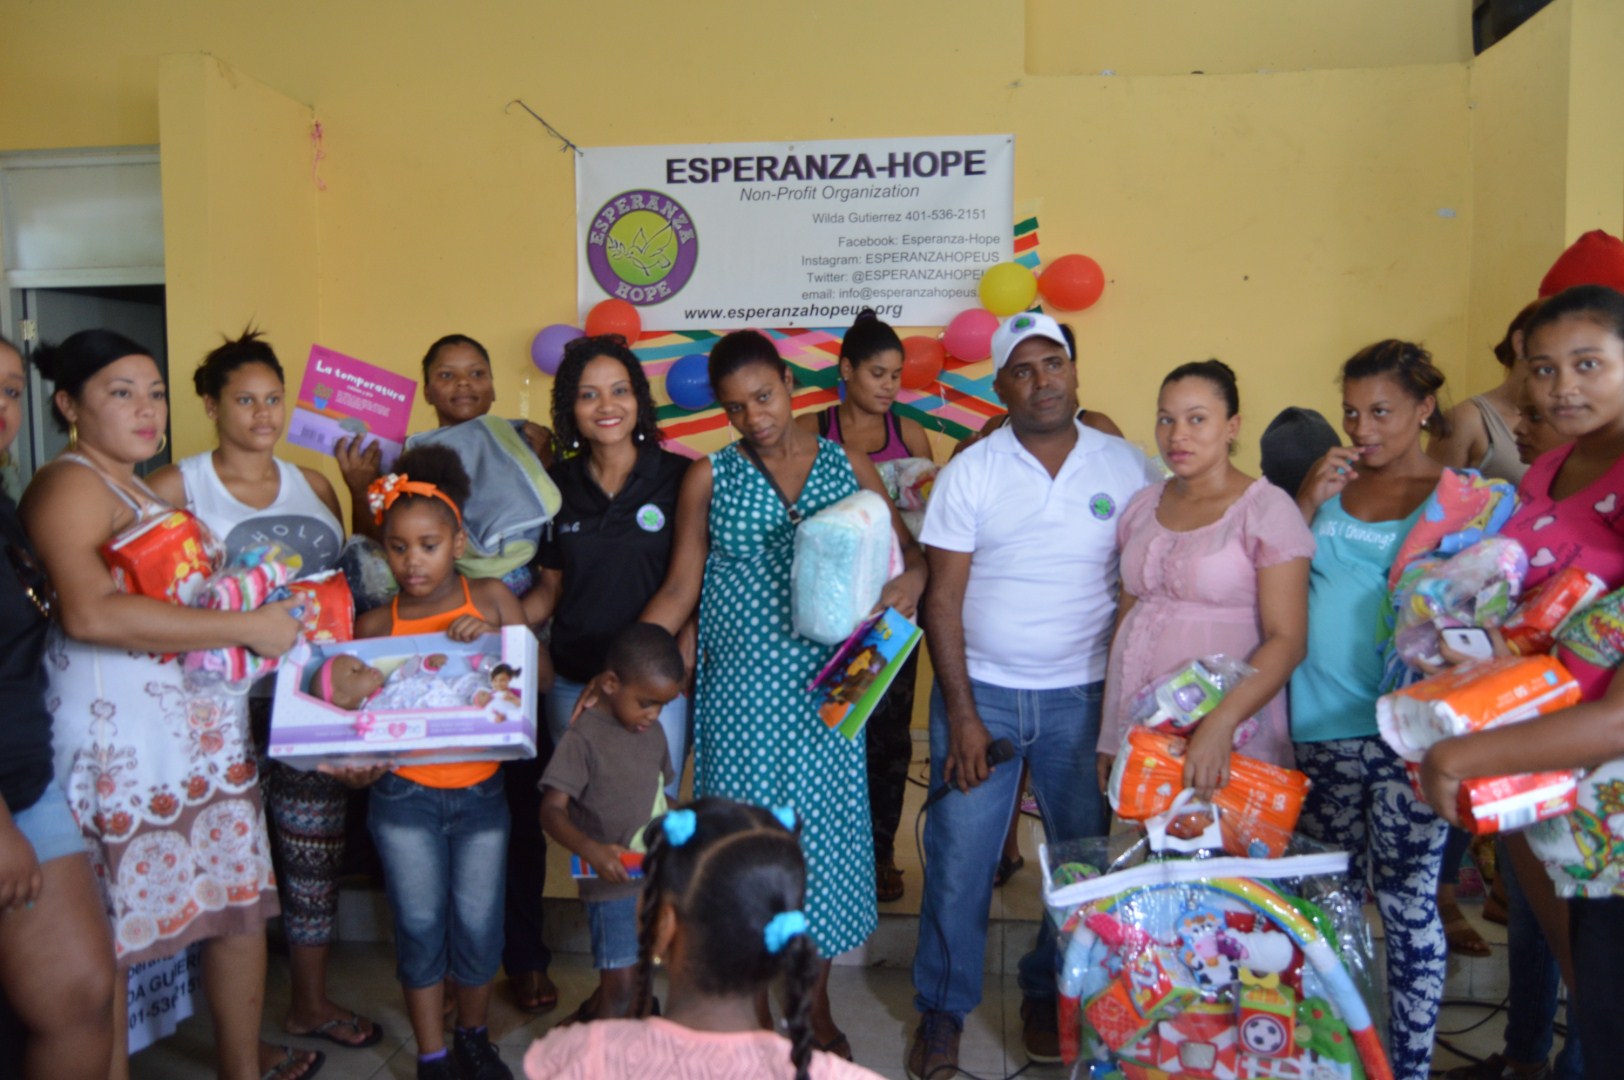 The mothers and some of their children holding toys, diapers, and clothes